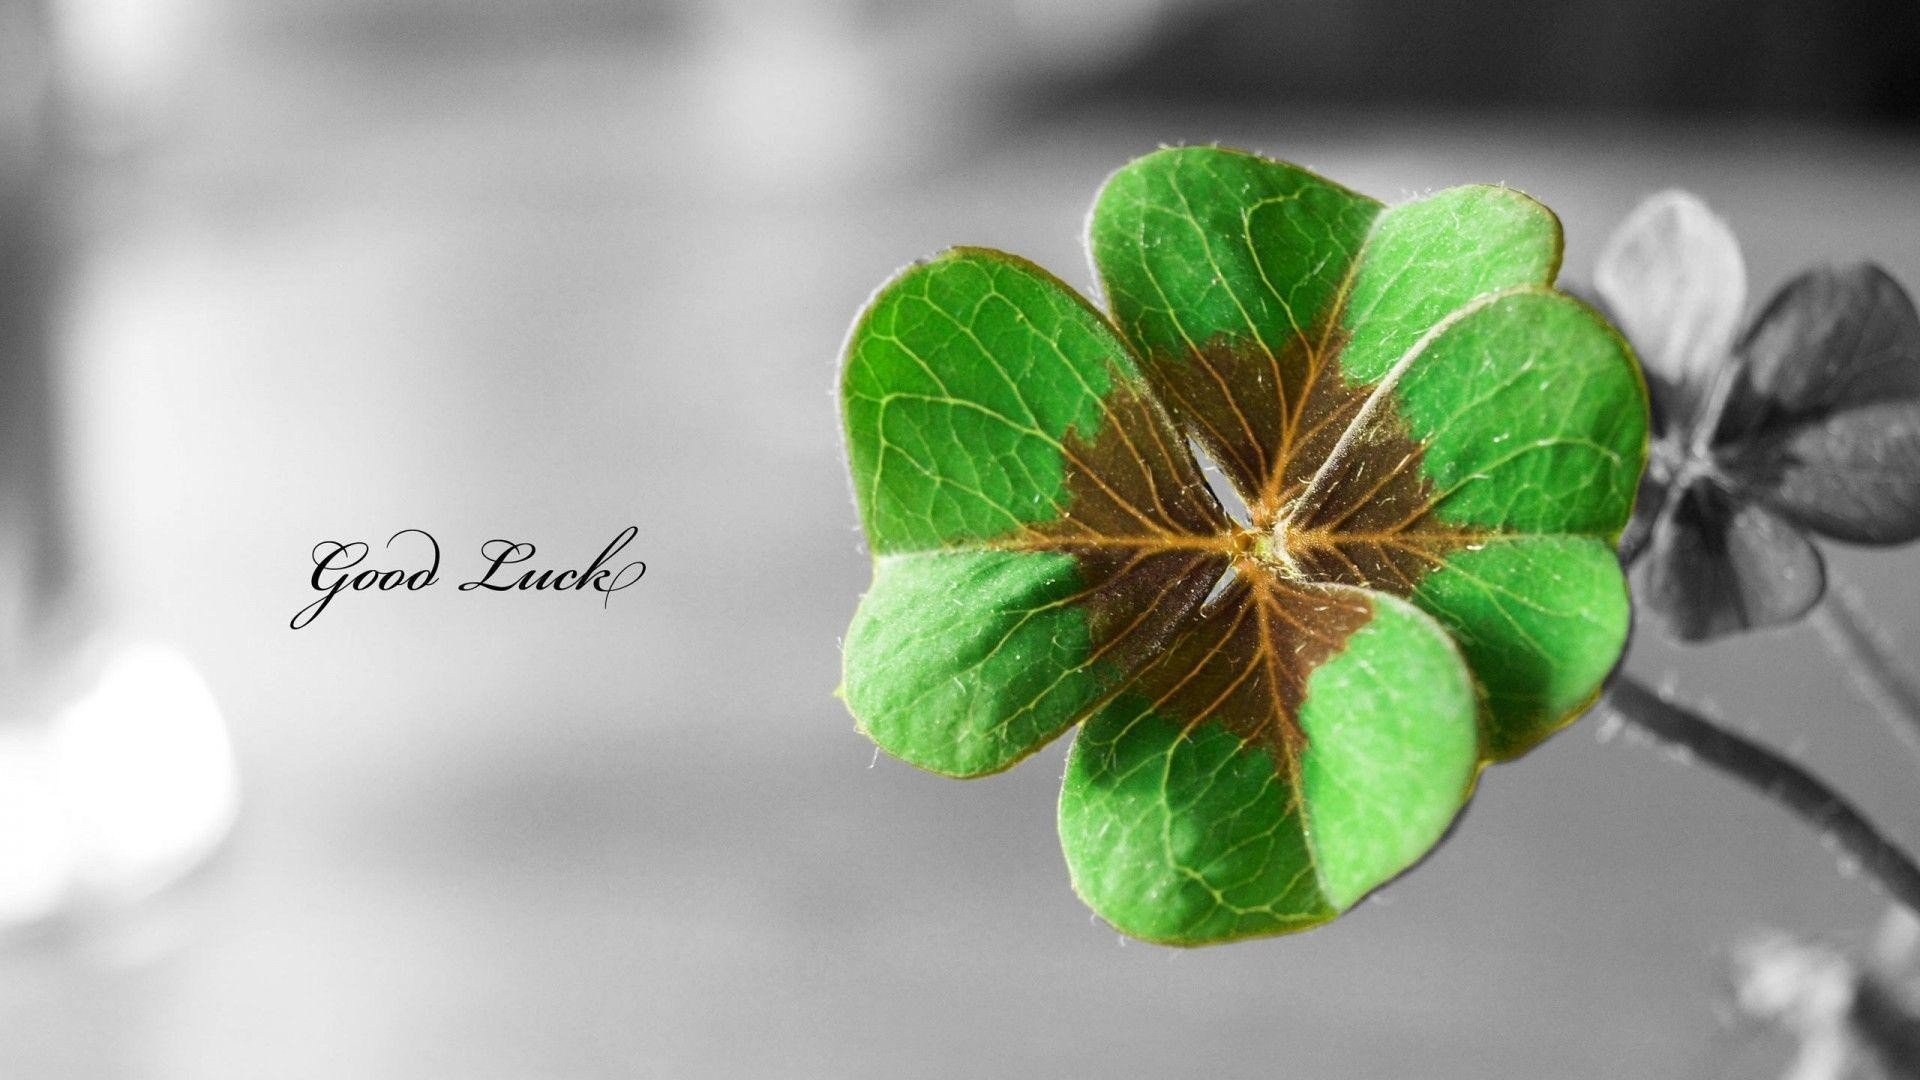 Good Luck: An extra leaf of a three-leaf clover, Symbol of a success. 1920x1080 Full HD Wallpaper.